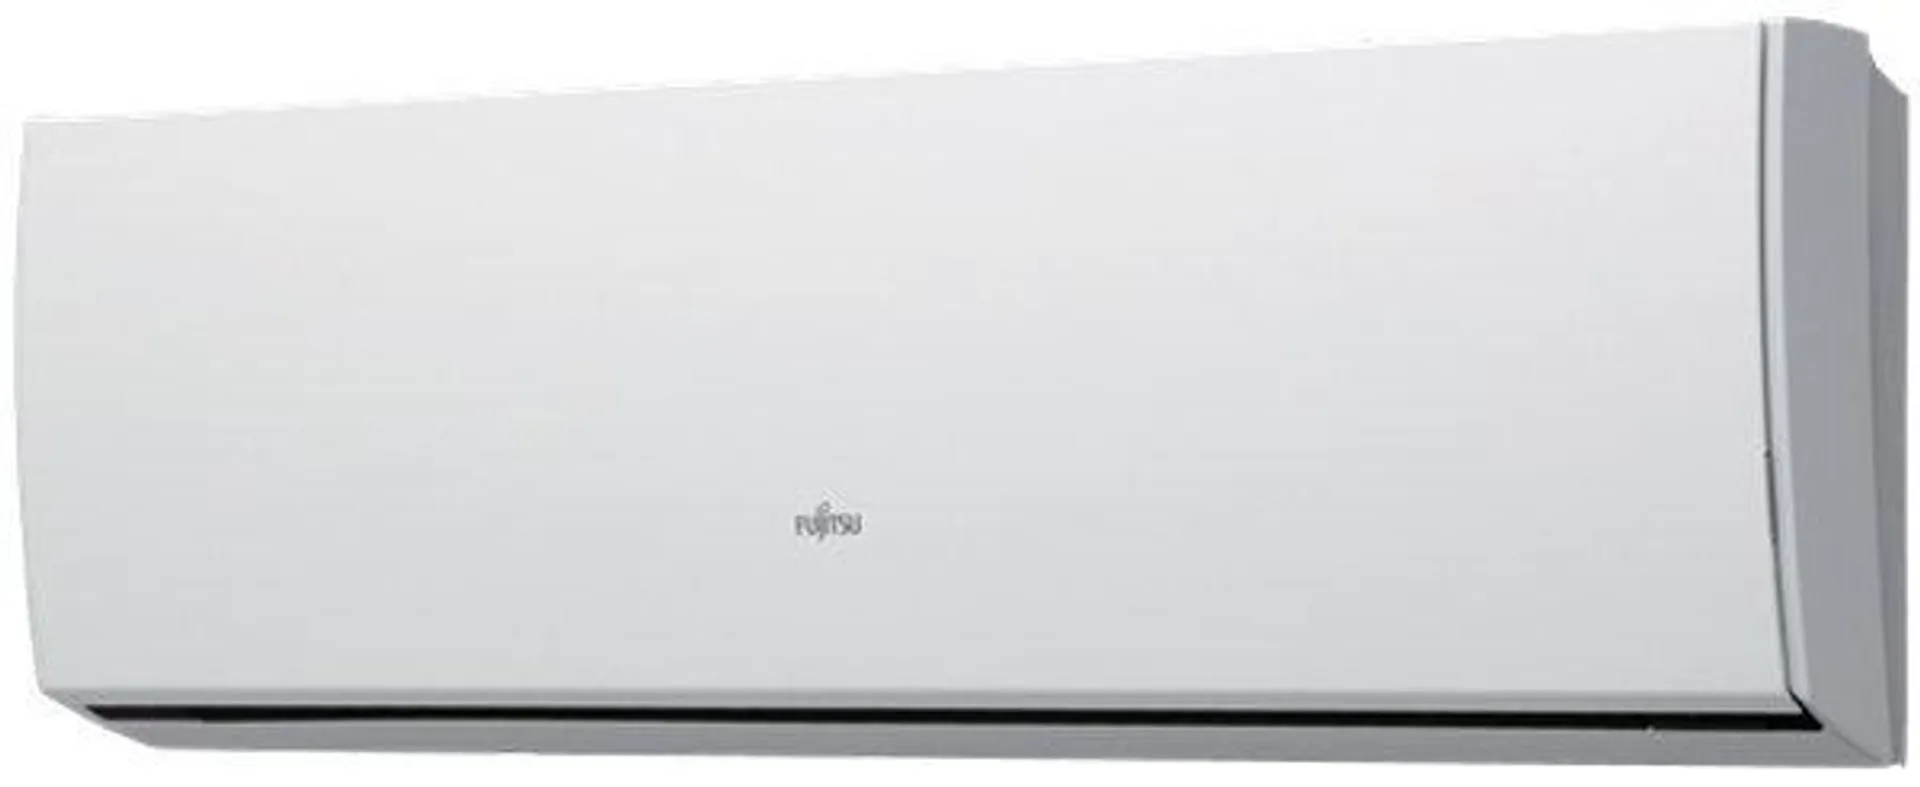 Fujitsu 3.5kW Reverse Cycle Split System Inverter Air Conditioner DRED Enabled ASTG12KUCA